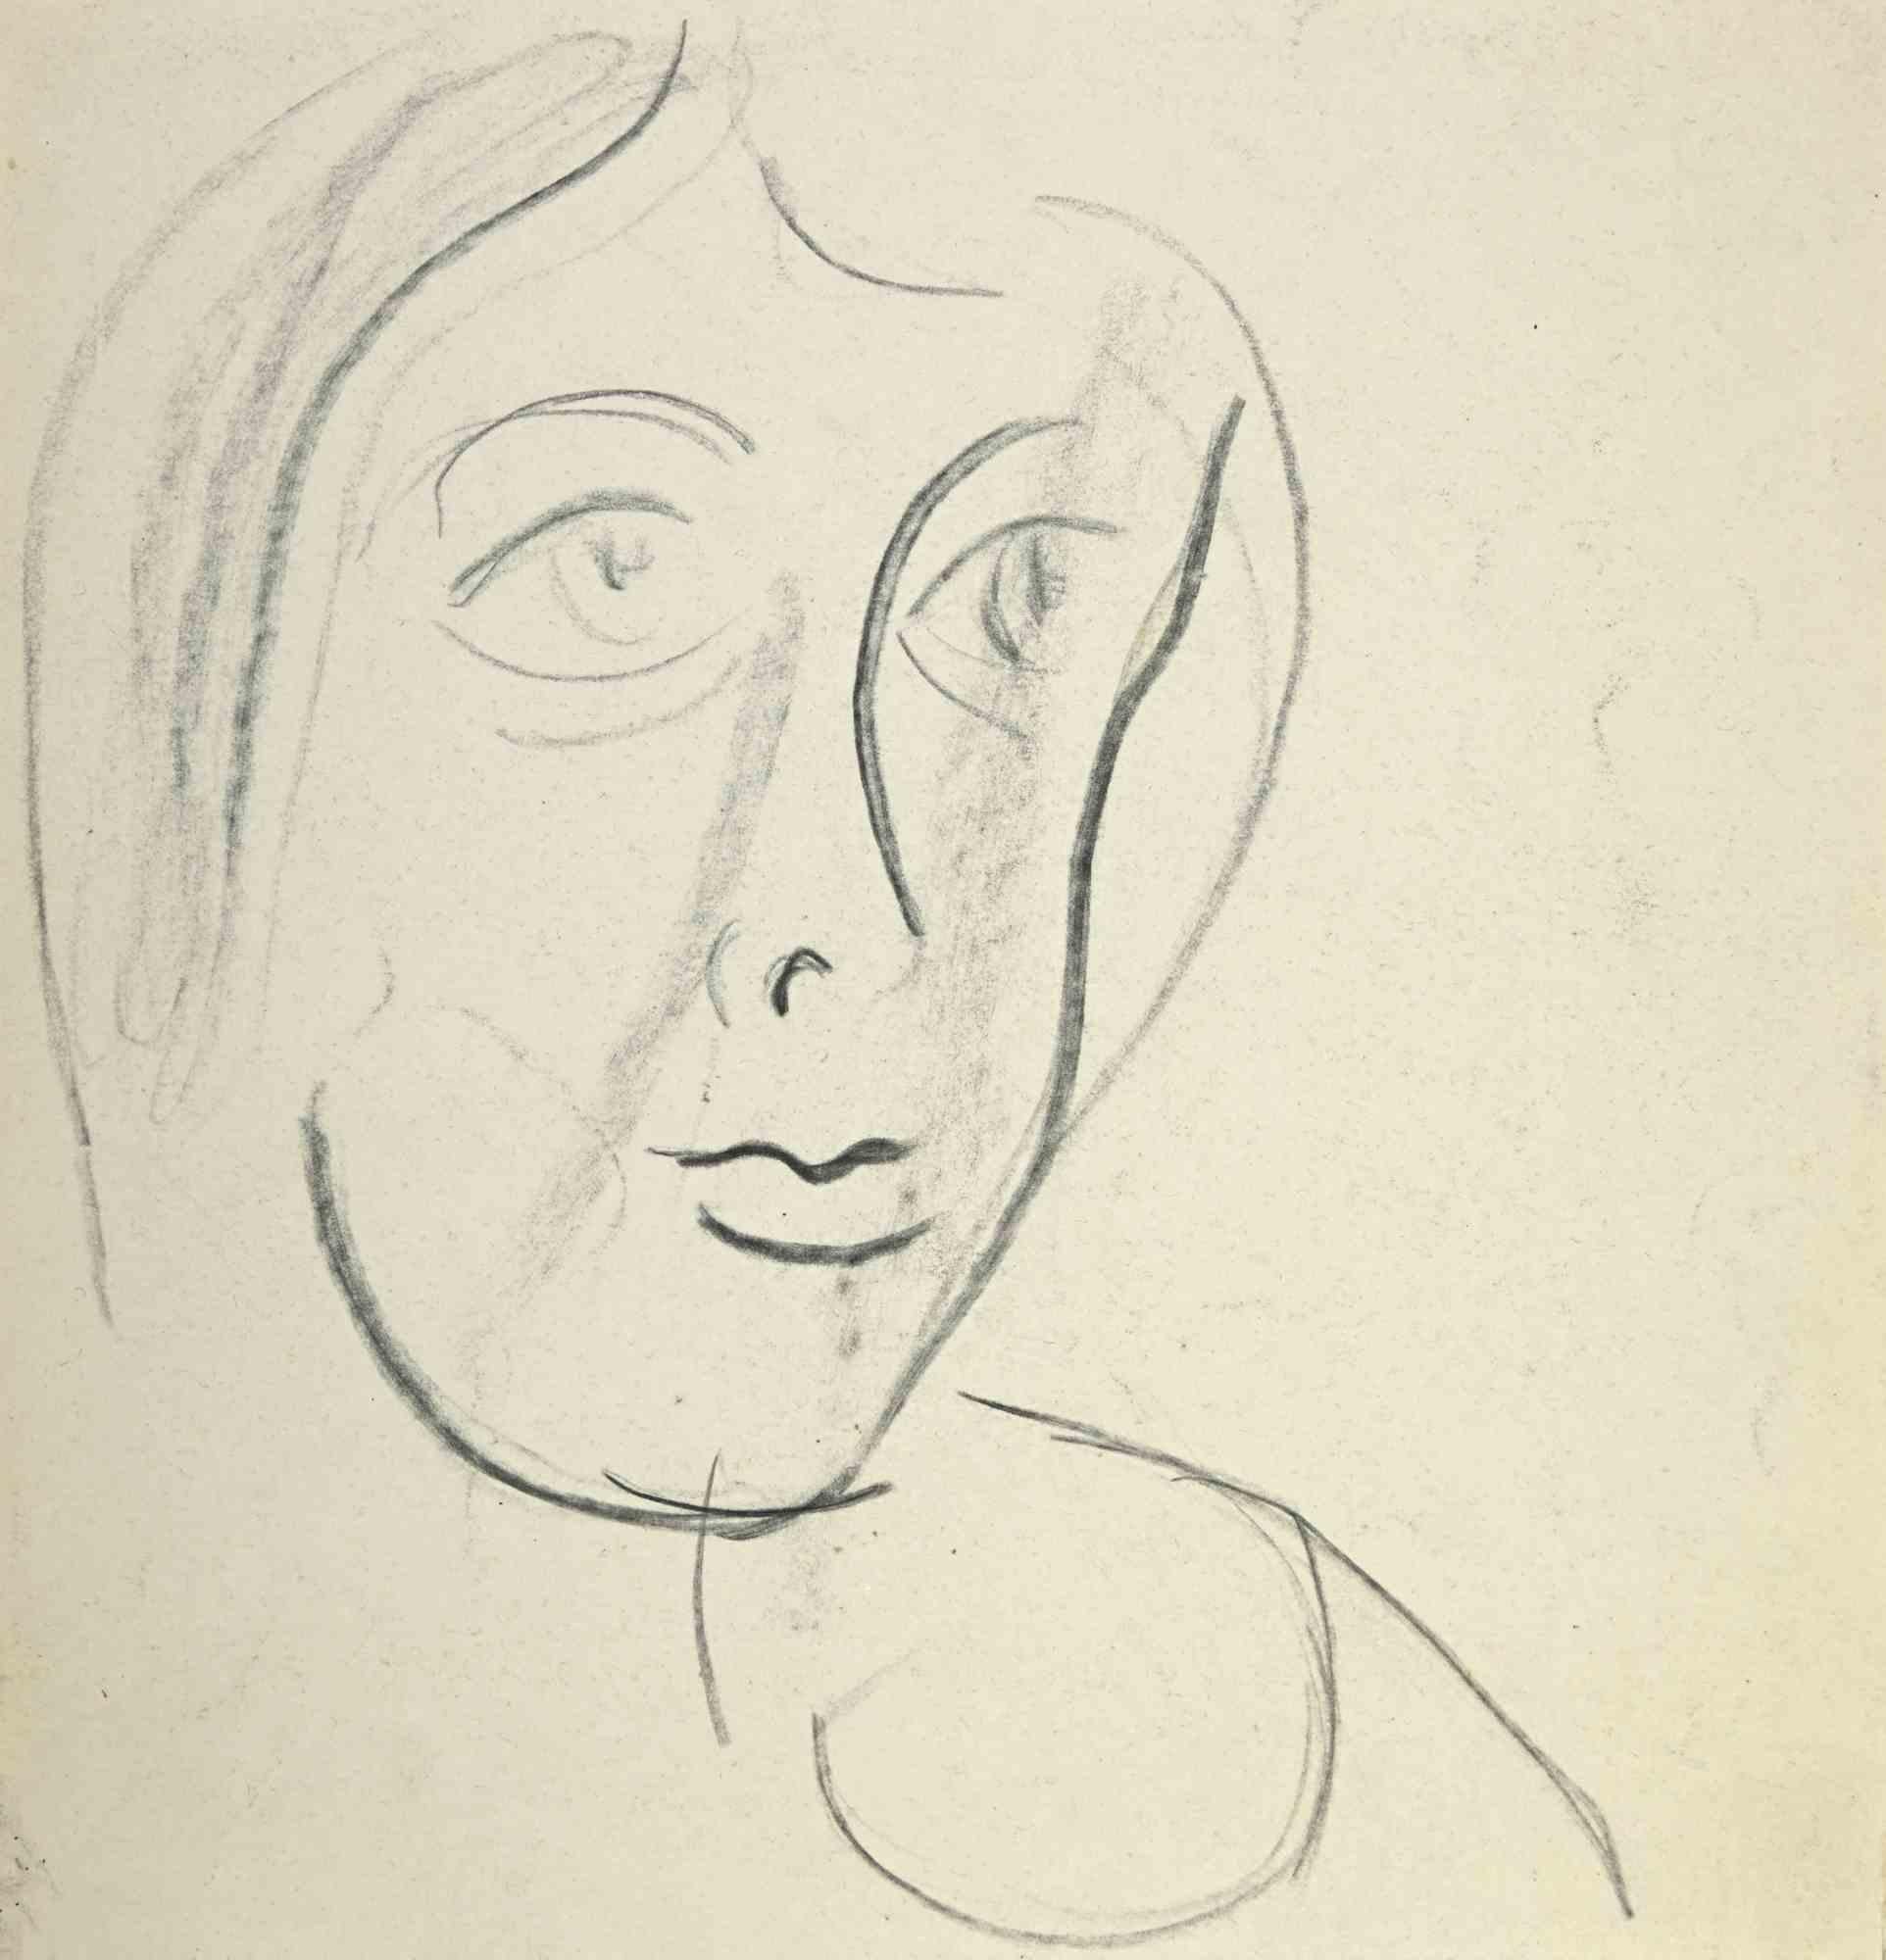 Louis Berthomme Saint-Andre Figurative Art - The  Woman's Face - Drawing by L. B. Saint-André - Mid 20th Century